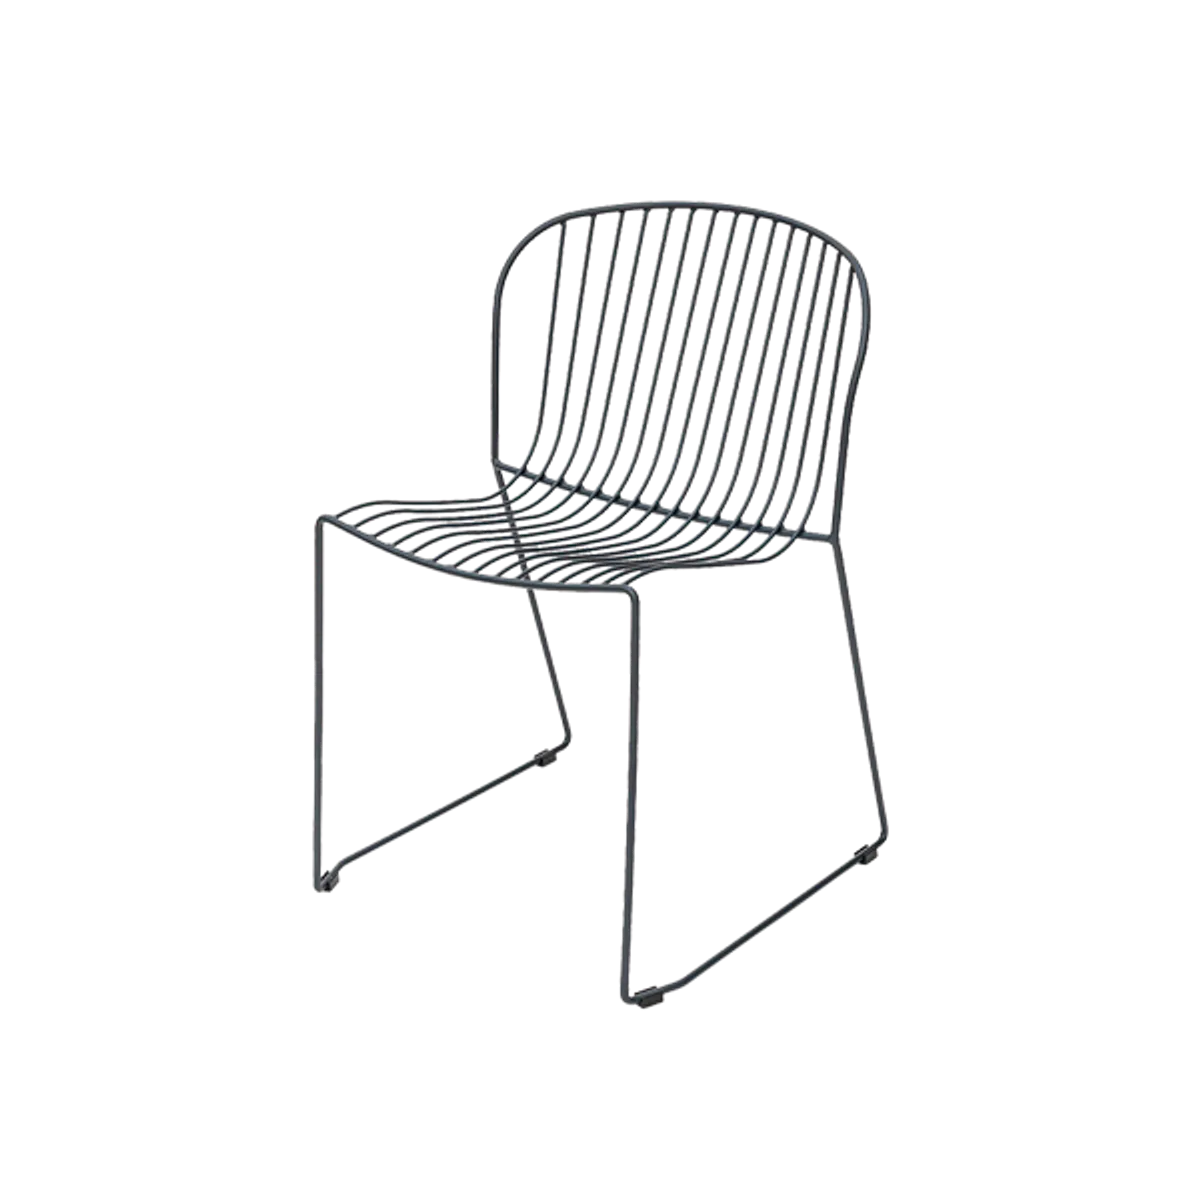 Web Bali Chair In Black Metal Outdoor Contract Suitable Furniture For Cafes And Bars Insideoutcontracts